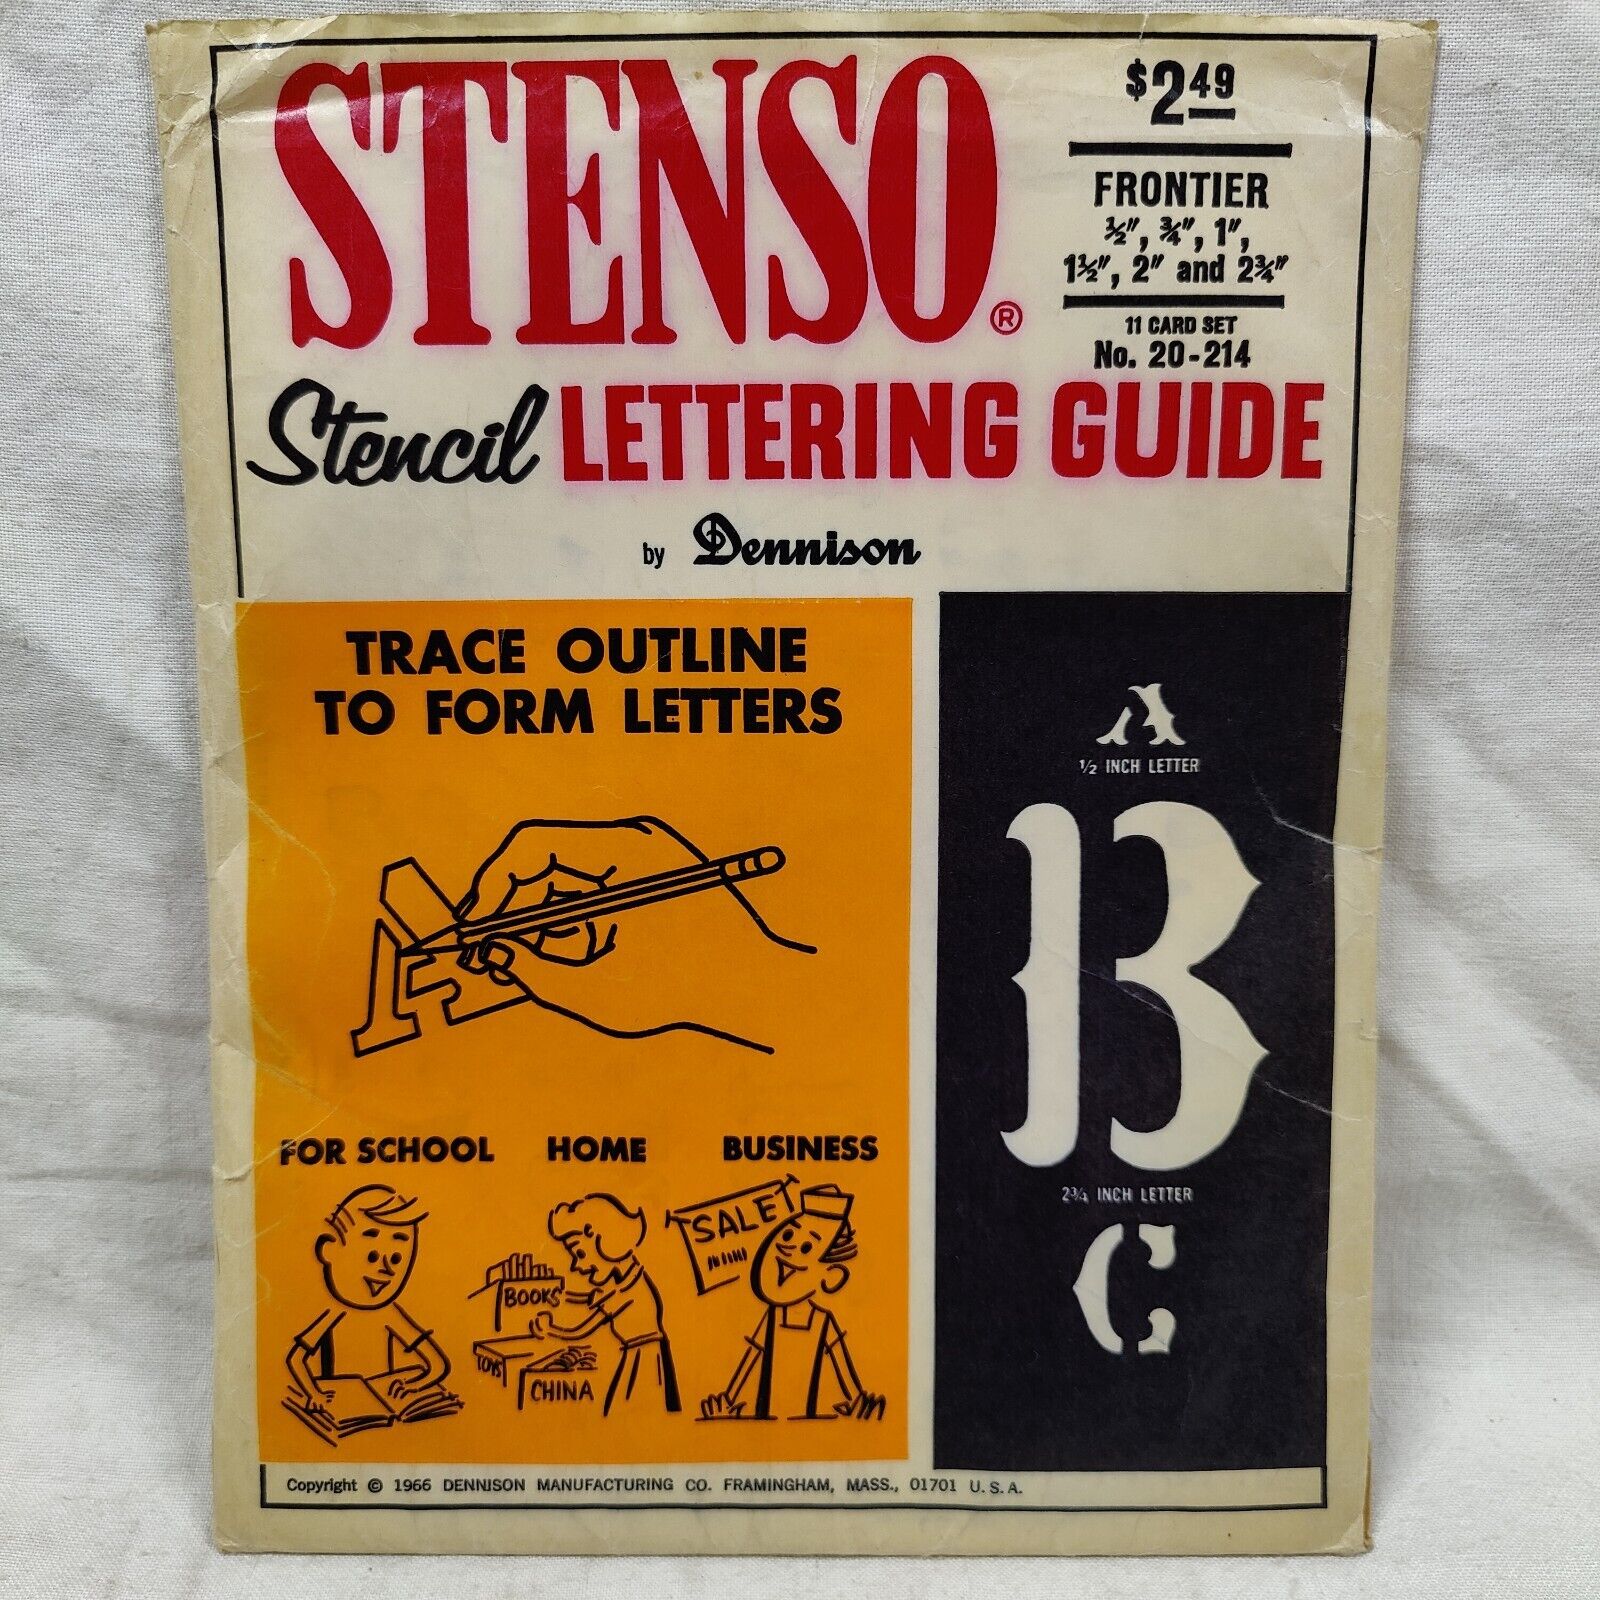 Vtg 1966 Stenso Stencil Lettering Guide By Dennison FRONTIER 1/2“- 2\